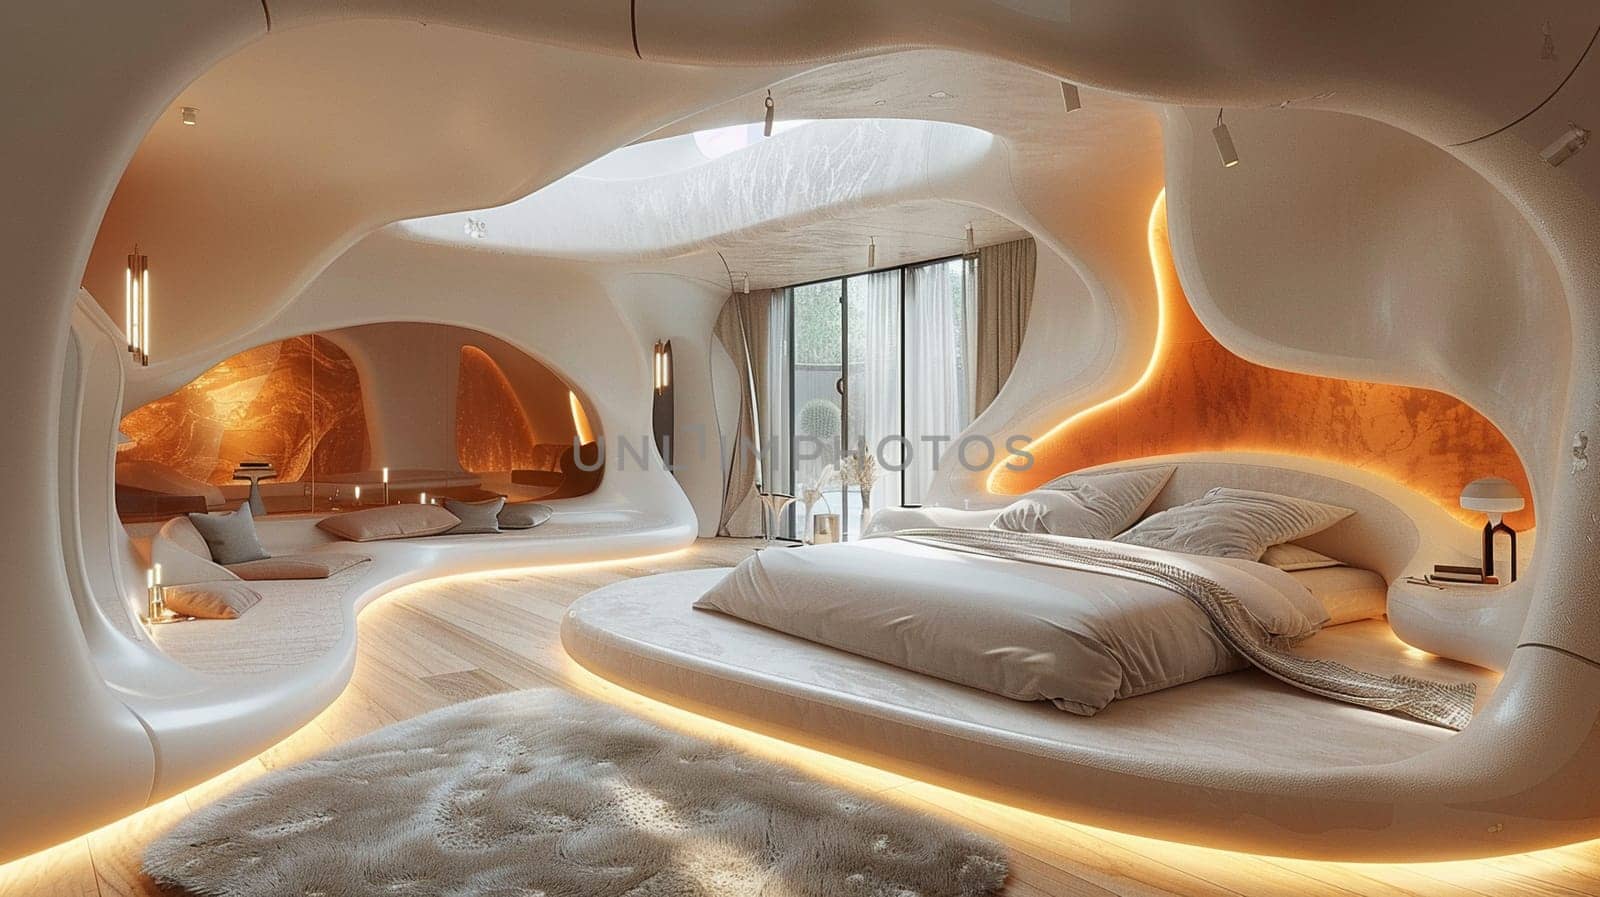 Futuristic bedroom with dynamic lighting and modular furniture